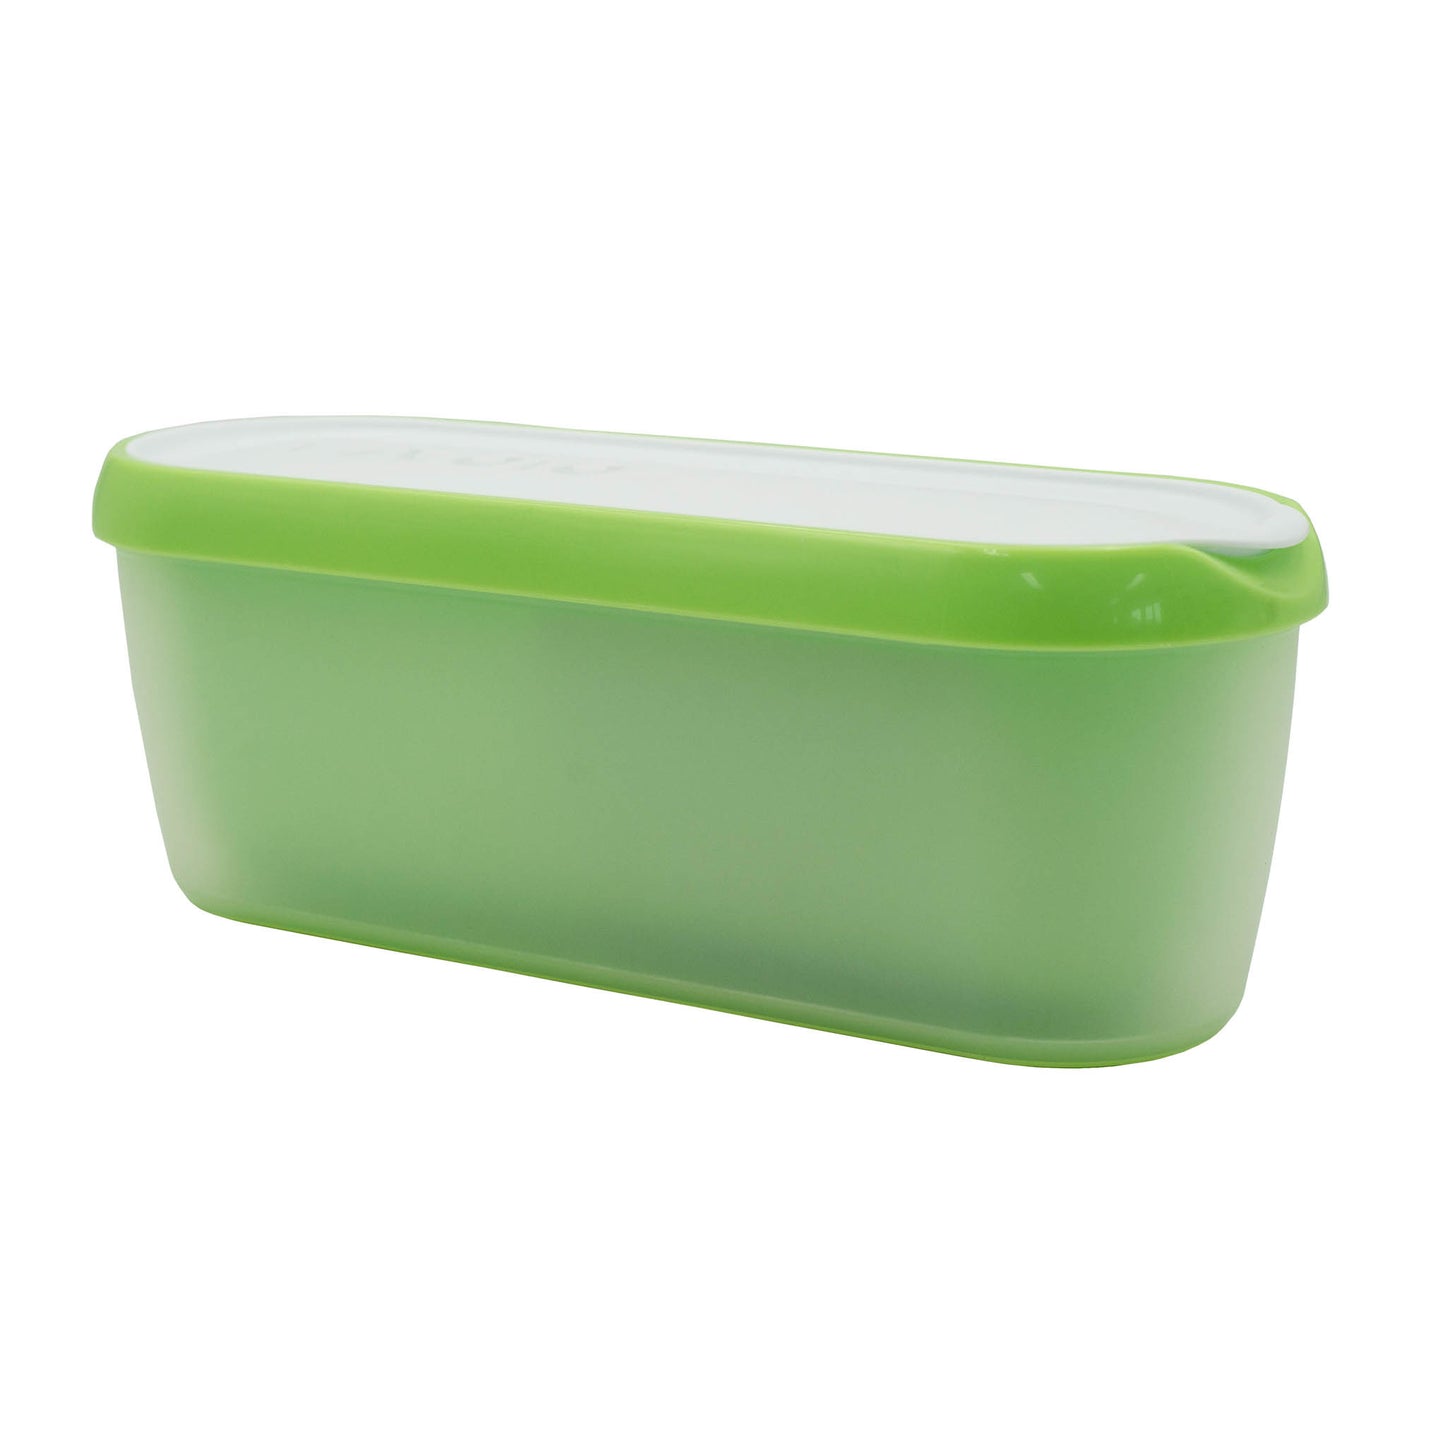 Green food grade plastic ice cream tub for storing up to 1.4 litres of ice cream, sorbet or gelato. 